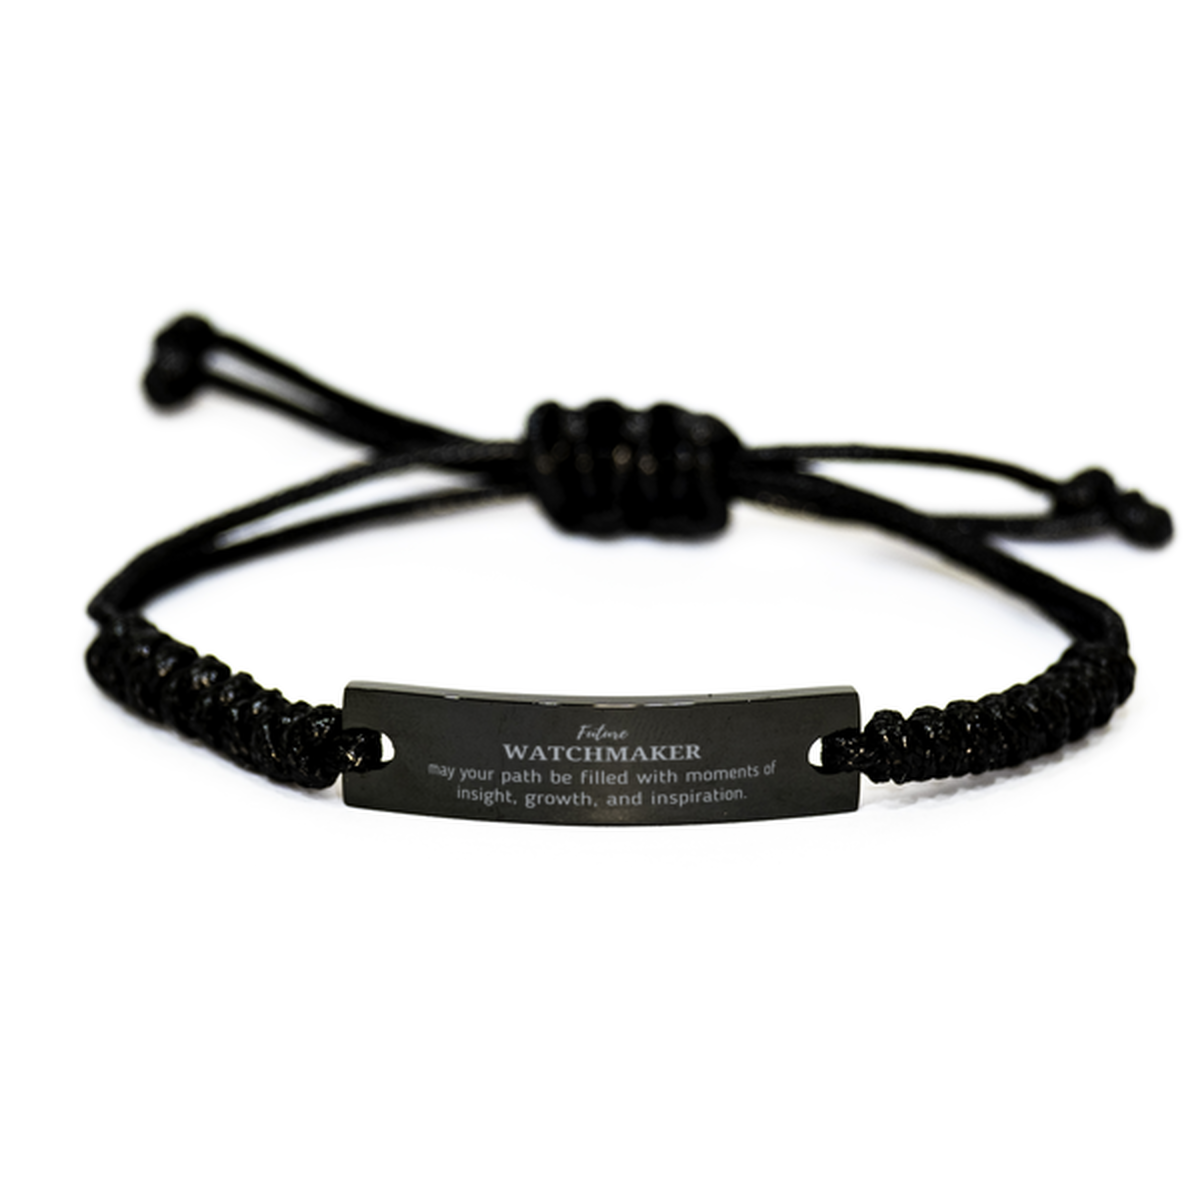 Future Watchmaker Gifts, May your path be filled with moments of insight, Graduation Gifts for New Watchmaker, Christmas Unique Black Rope Bracelet For Men, Women, Friends